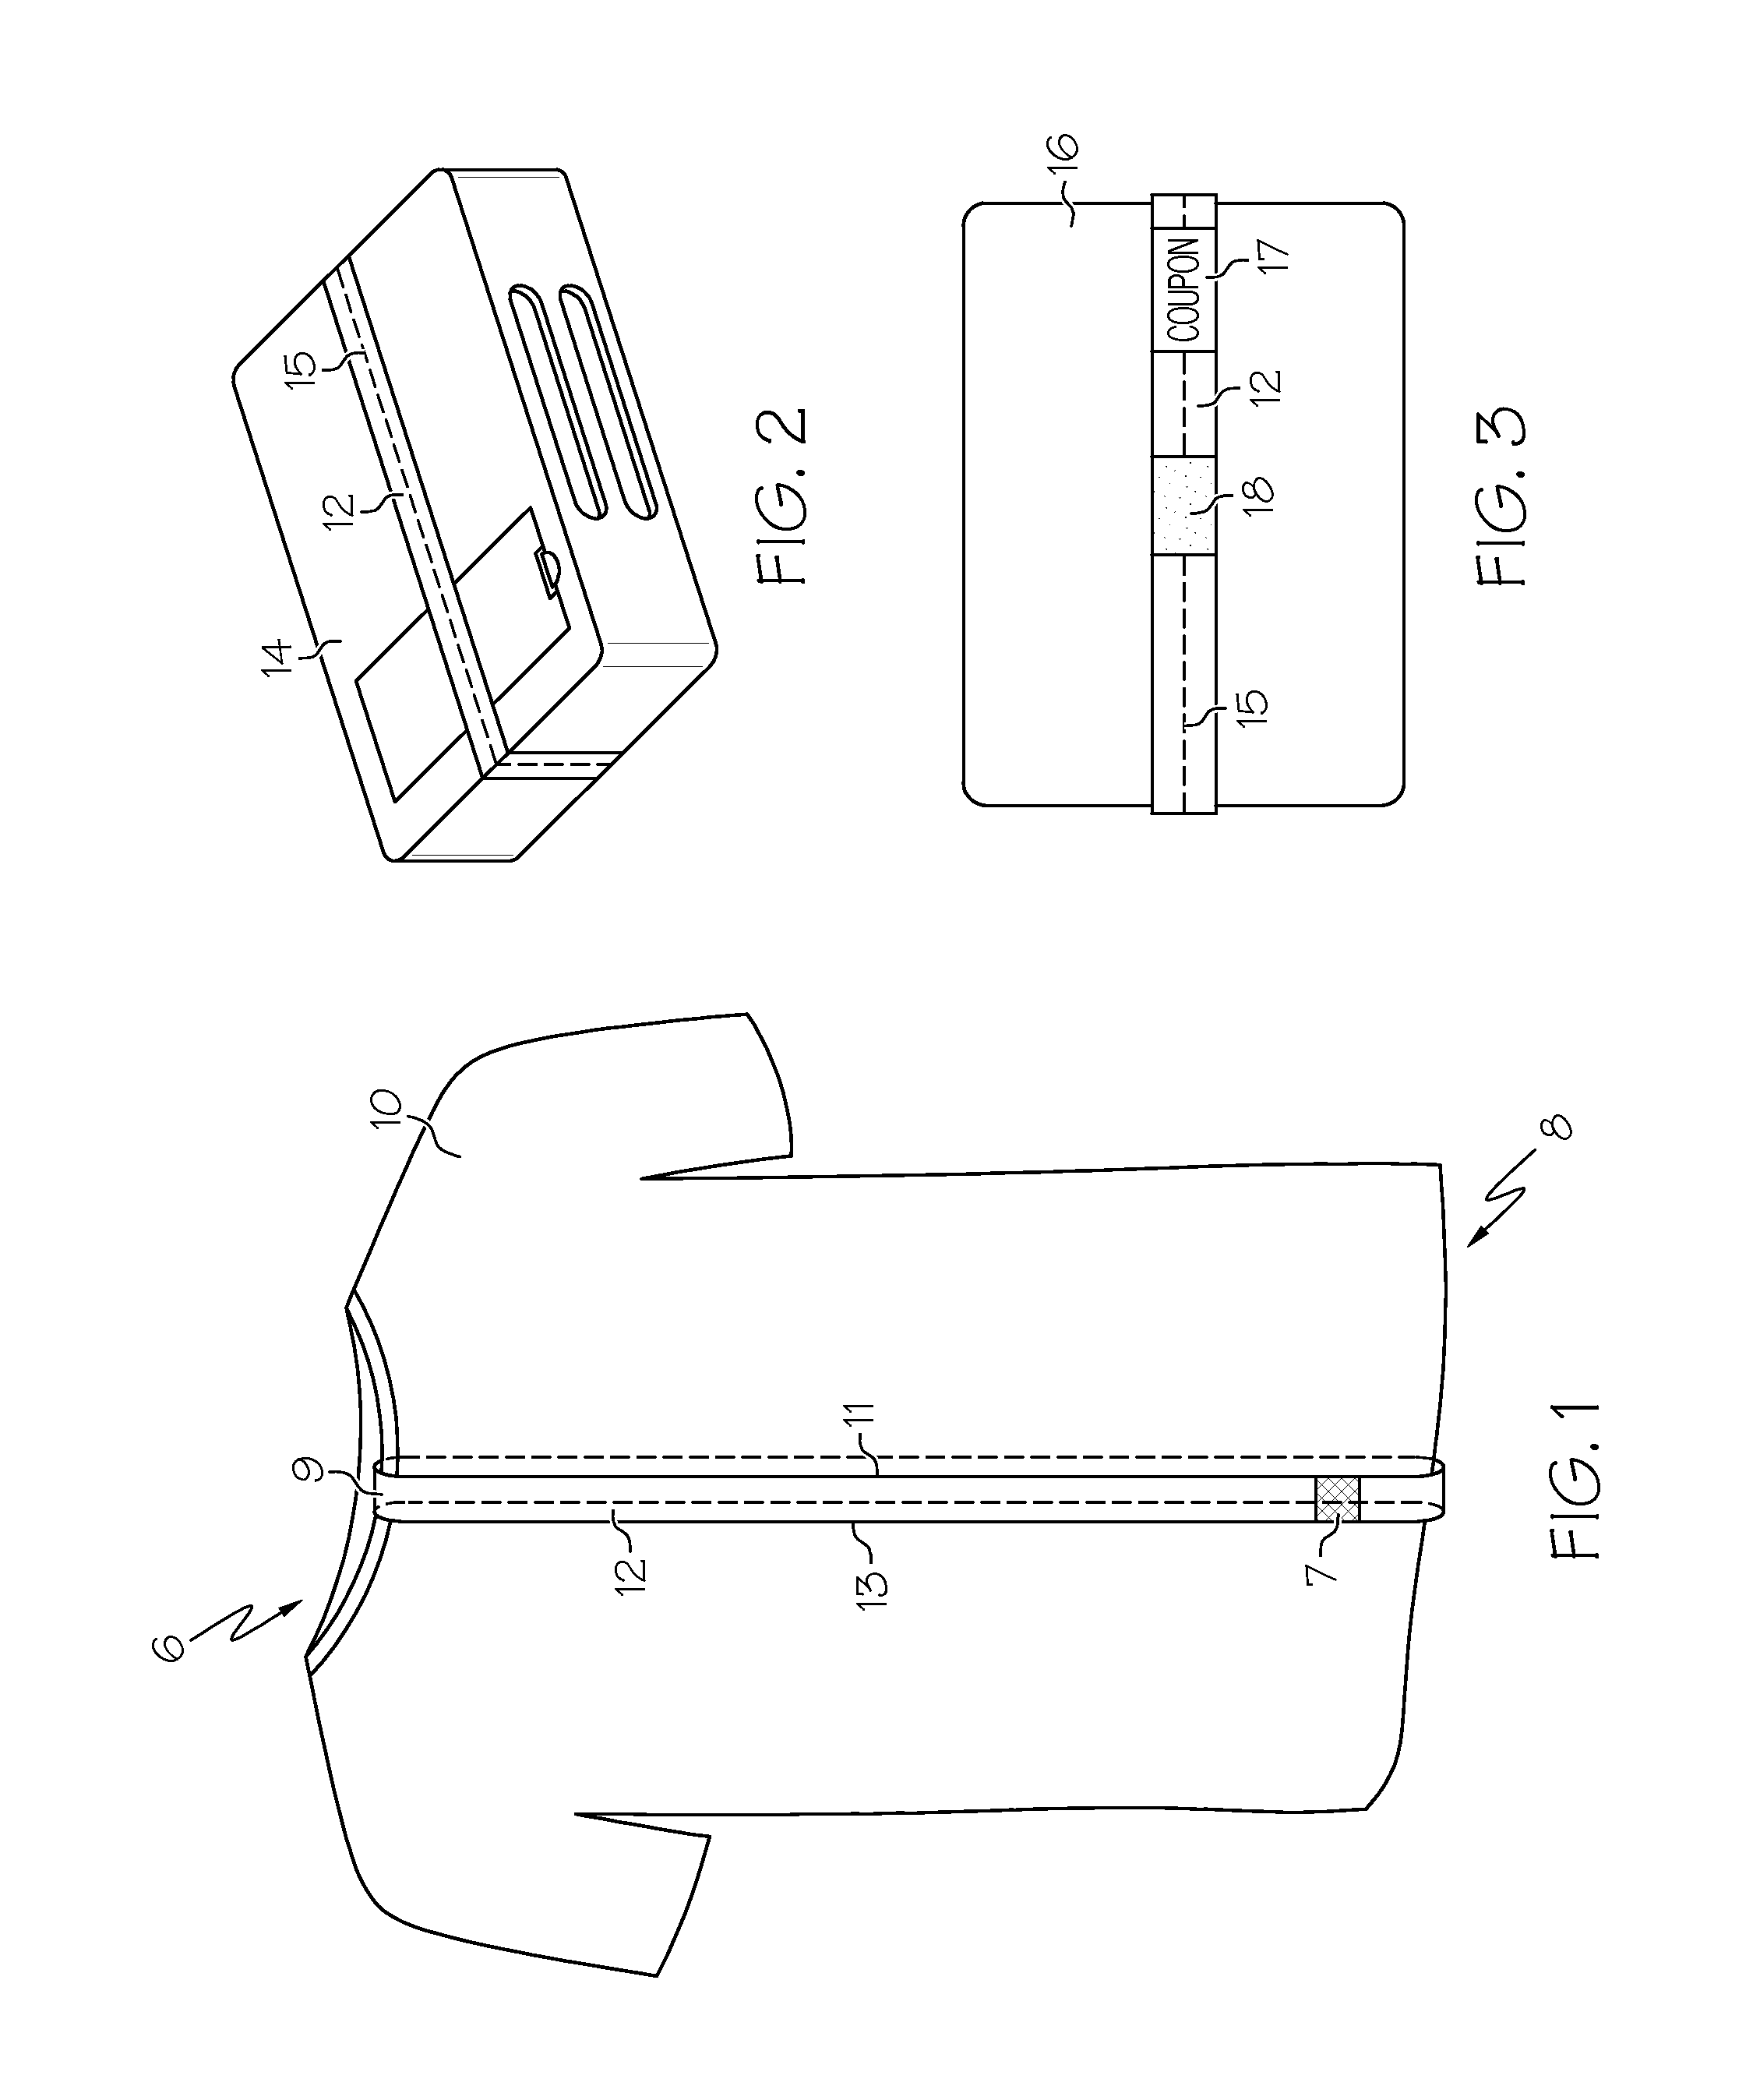 Antifraud device for garments and other consumer products and devices and system and method related thereto